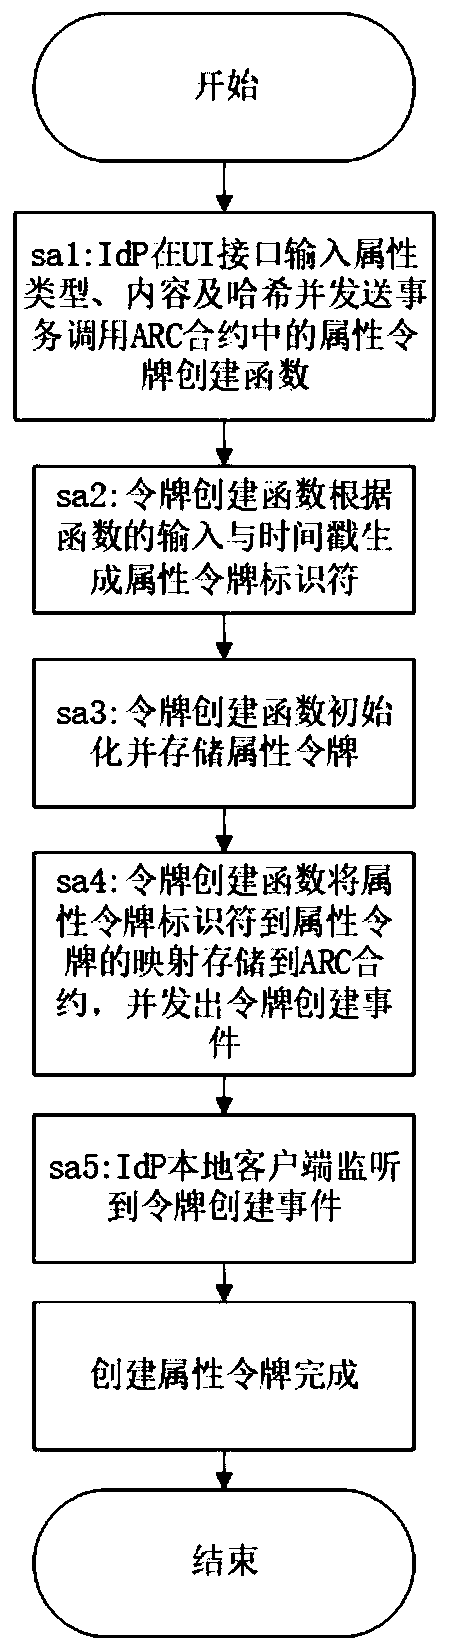 Identity management and authentication system and method based on block chain and zero knowledge proof